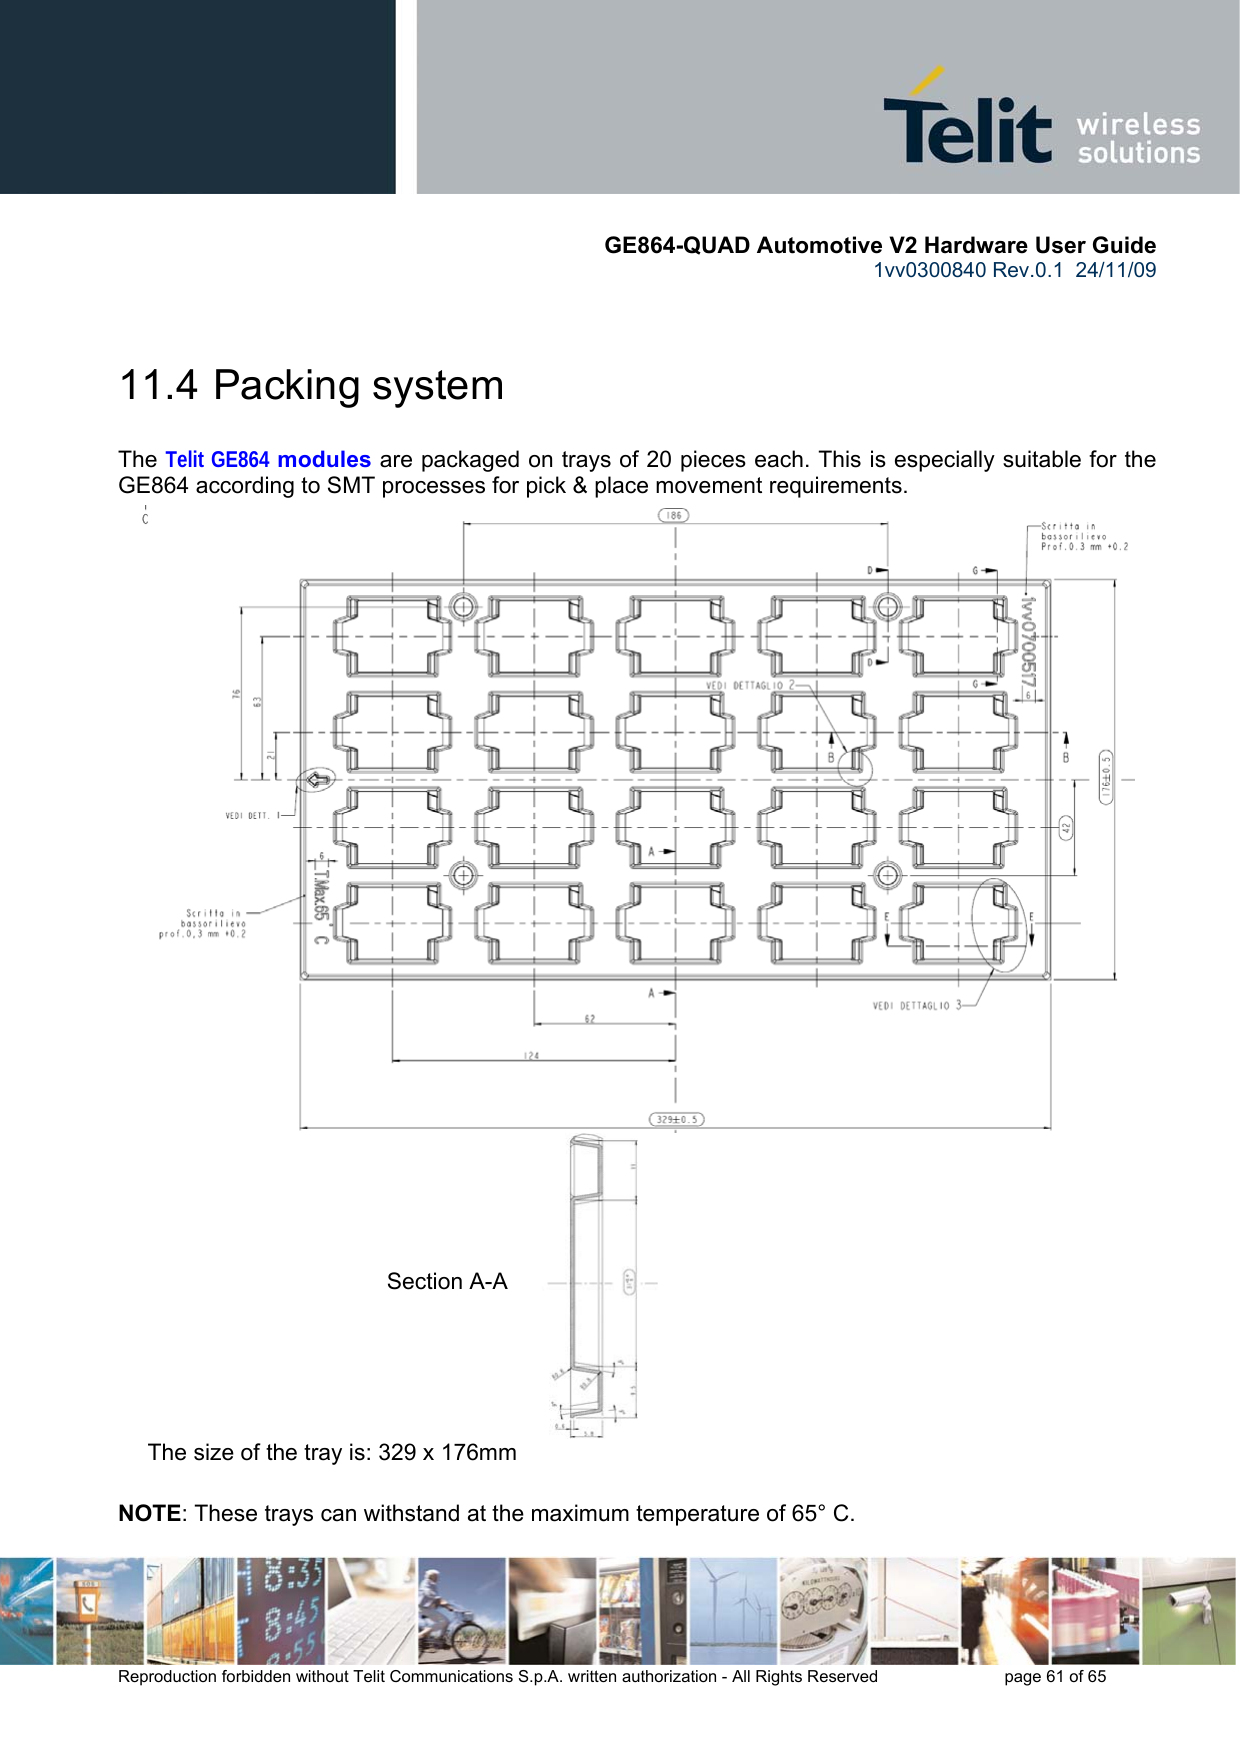       GE864-QUAD Automotive V2 Hardware User Guide 1vv0300840 Rev.0.1  24/11/09      Reproduction forbidden without Telit Communications S.p.A. written authorization - All Rights Reserved    page 61 of 65   11.4  Packing system  The Telit GE864 modules are packaged on trays of 20 pieces each. This is especially suitable for the GE864 according to SMT processes for pick &amp; place movement requirements.  The size of the tray is: 329 x 176mm  NOTE: These trays can withstand at the maximum temperature of 65° C. Section A-A 